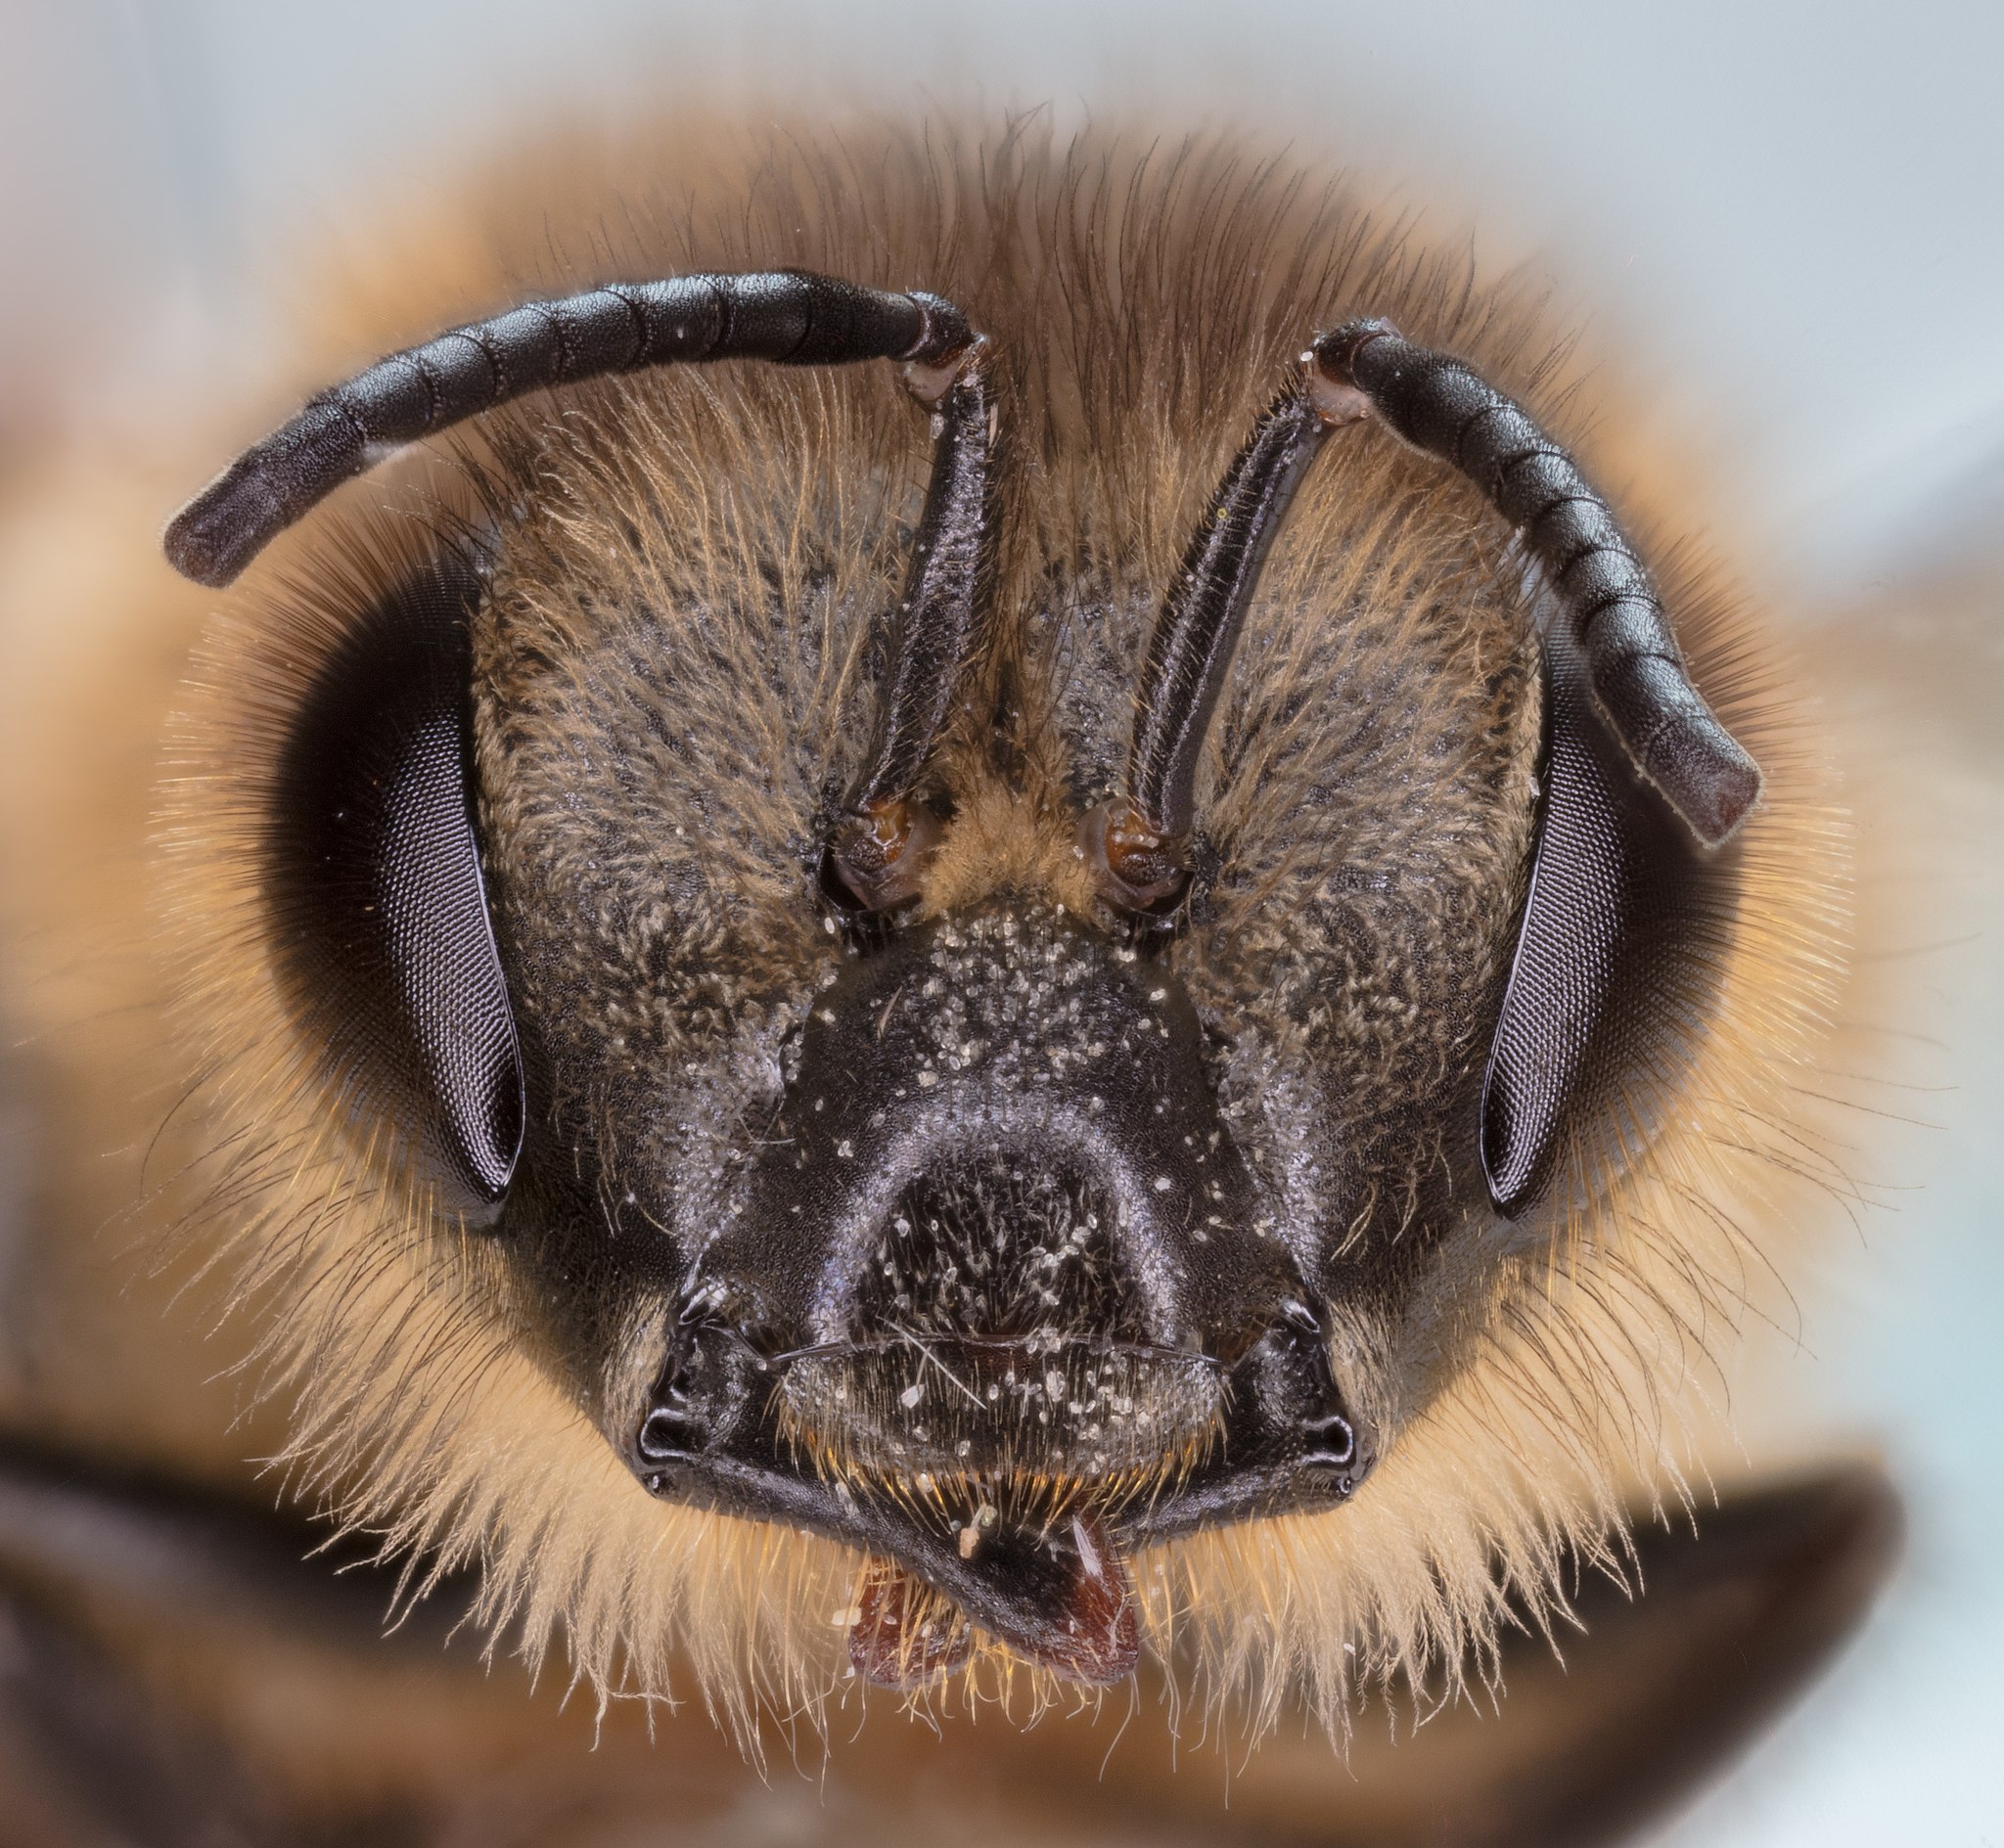 The head of a plasterer bee, a short-tongued bee